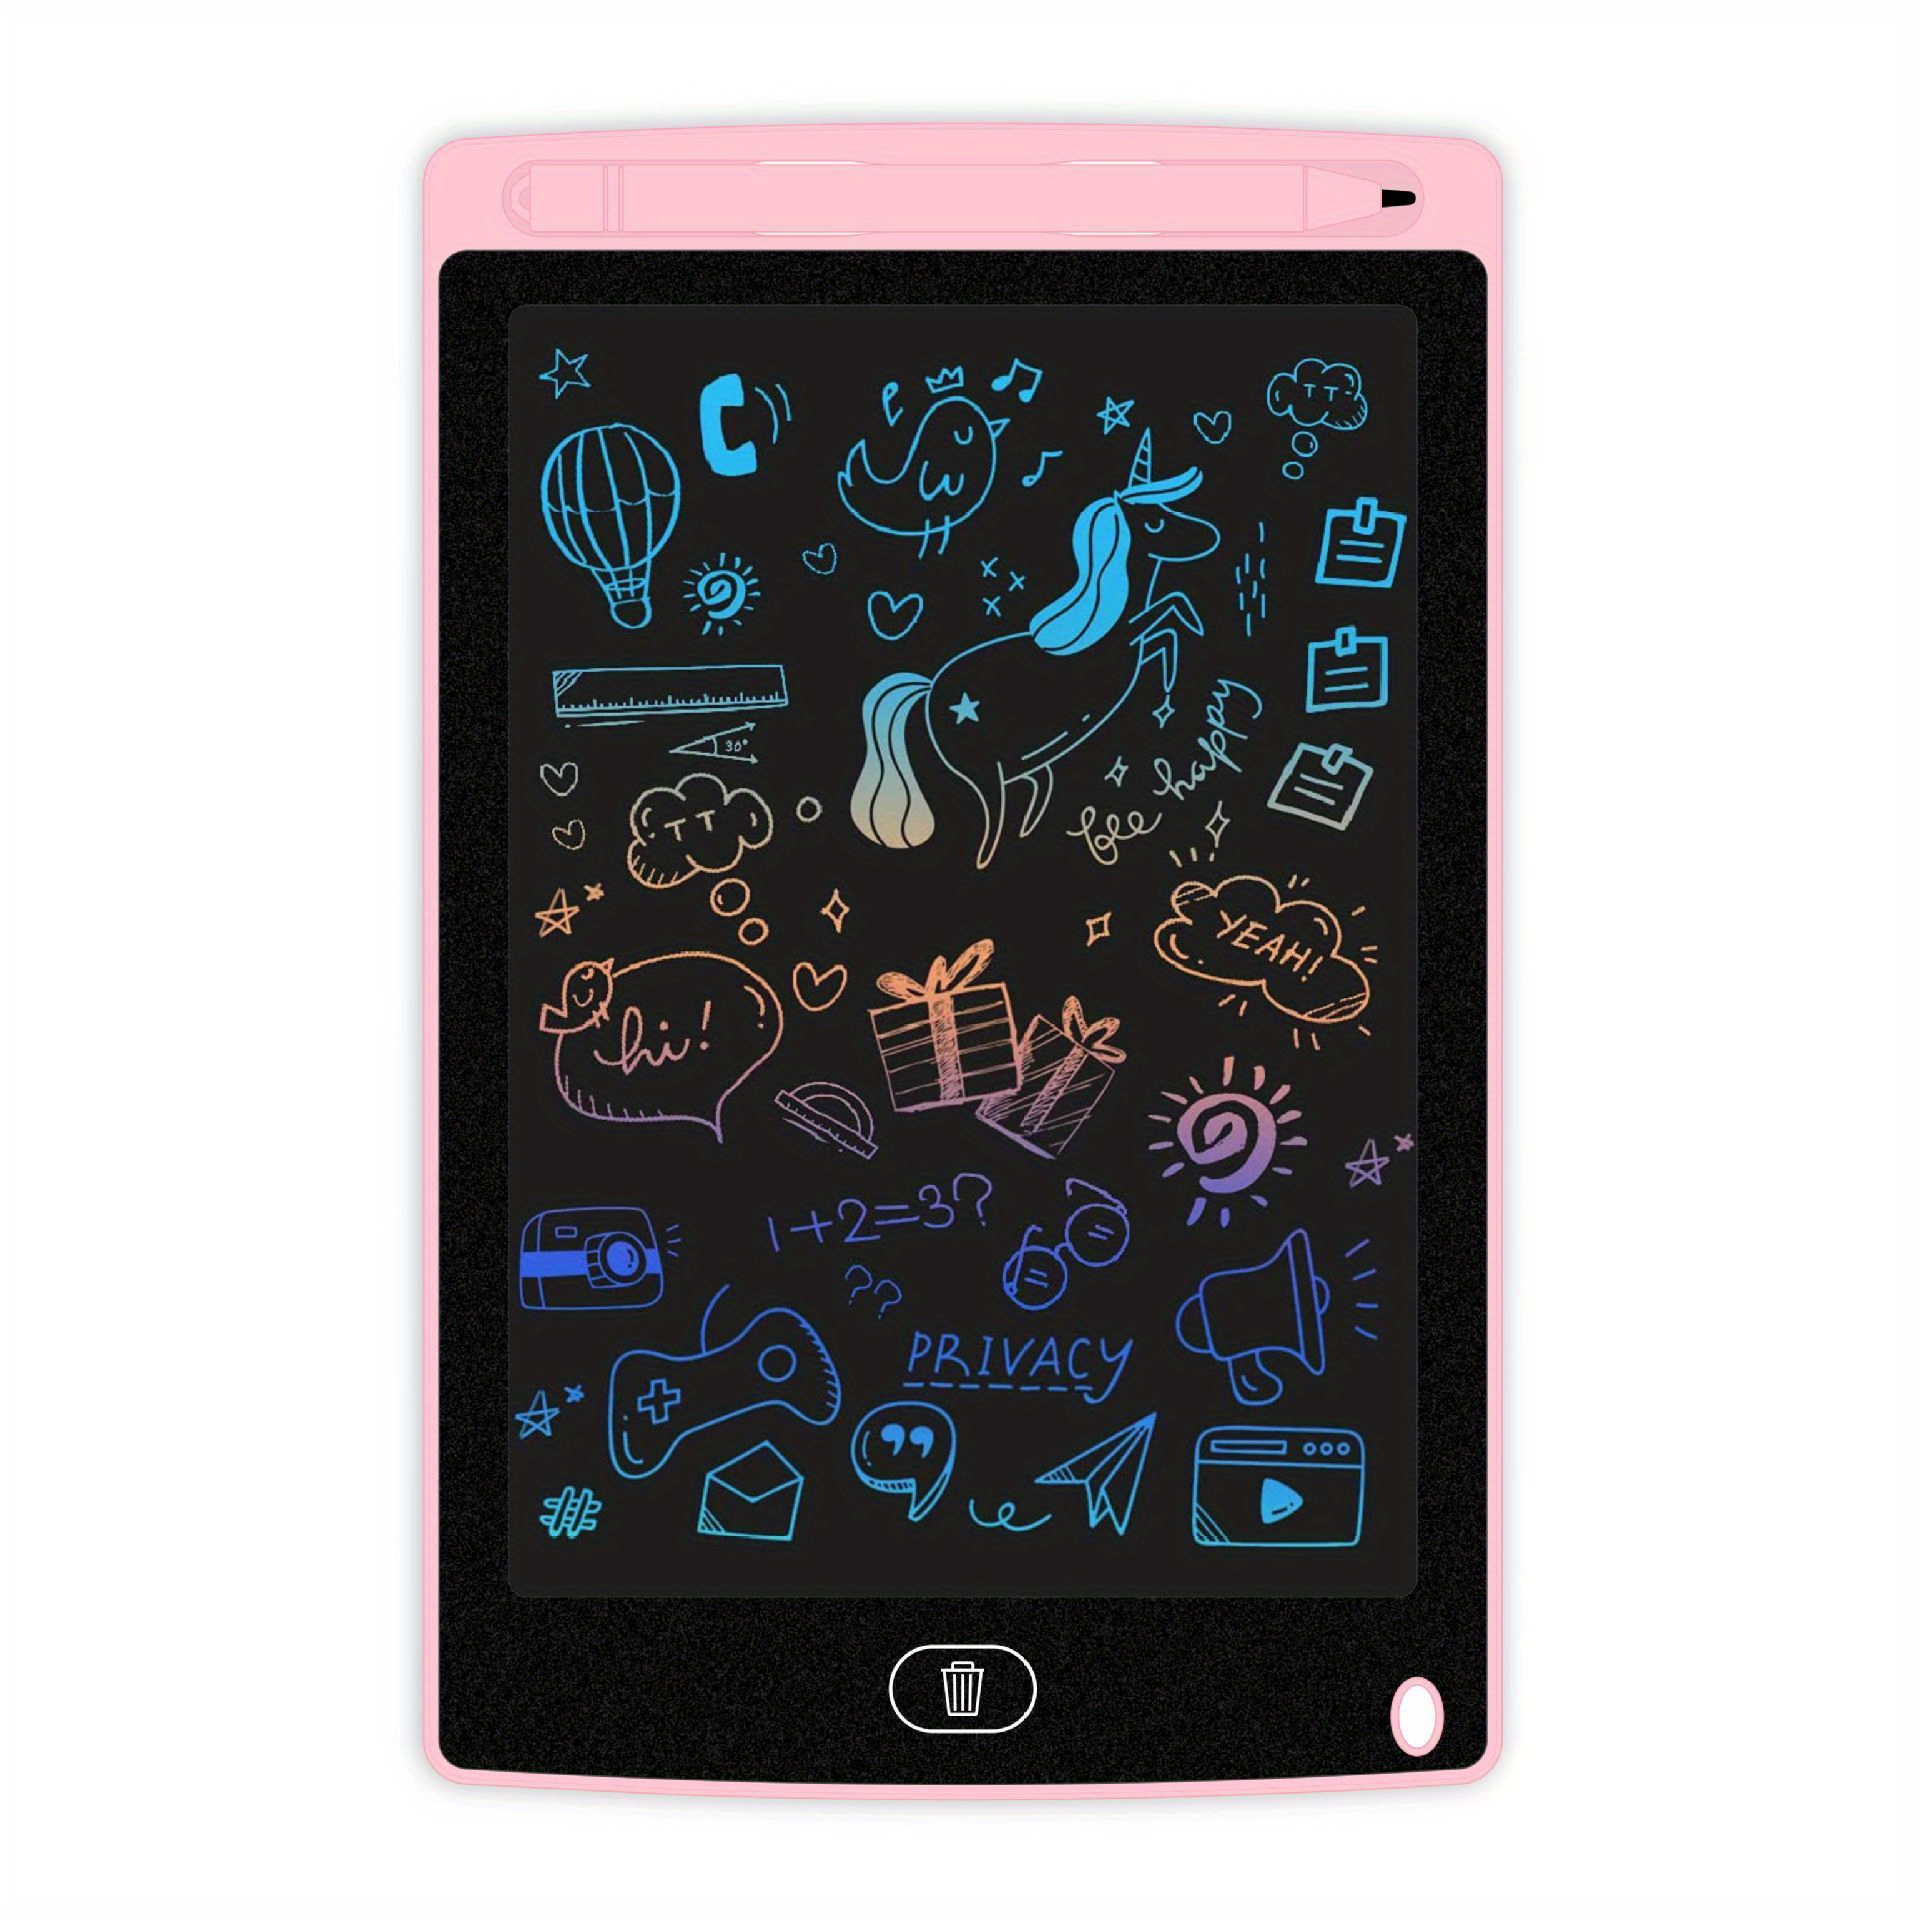 Welling LCD Handwriting Tablet Portable Smooth Writing 4.4/6.5/8.5 Inch  Smart Drawing Board Toy Gifts for Children 